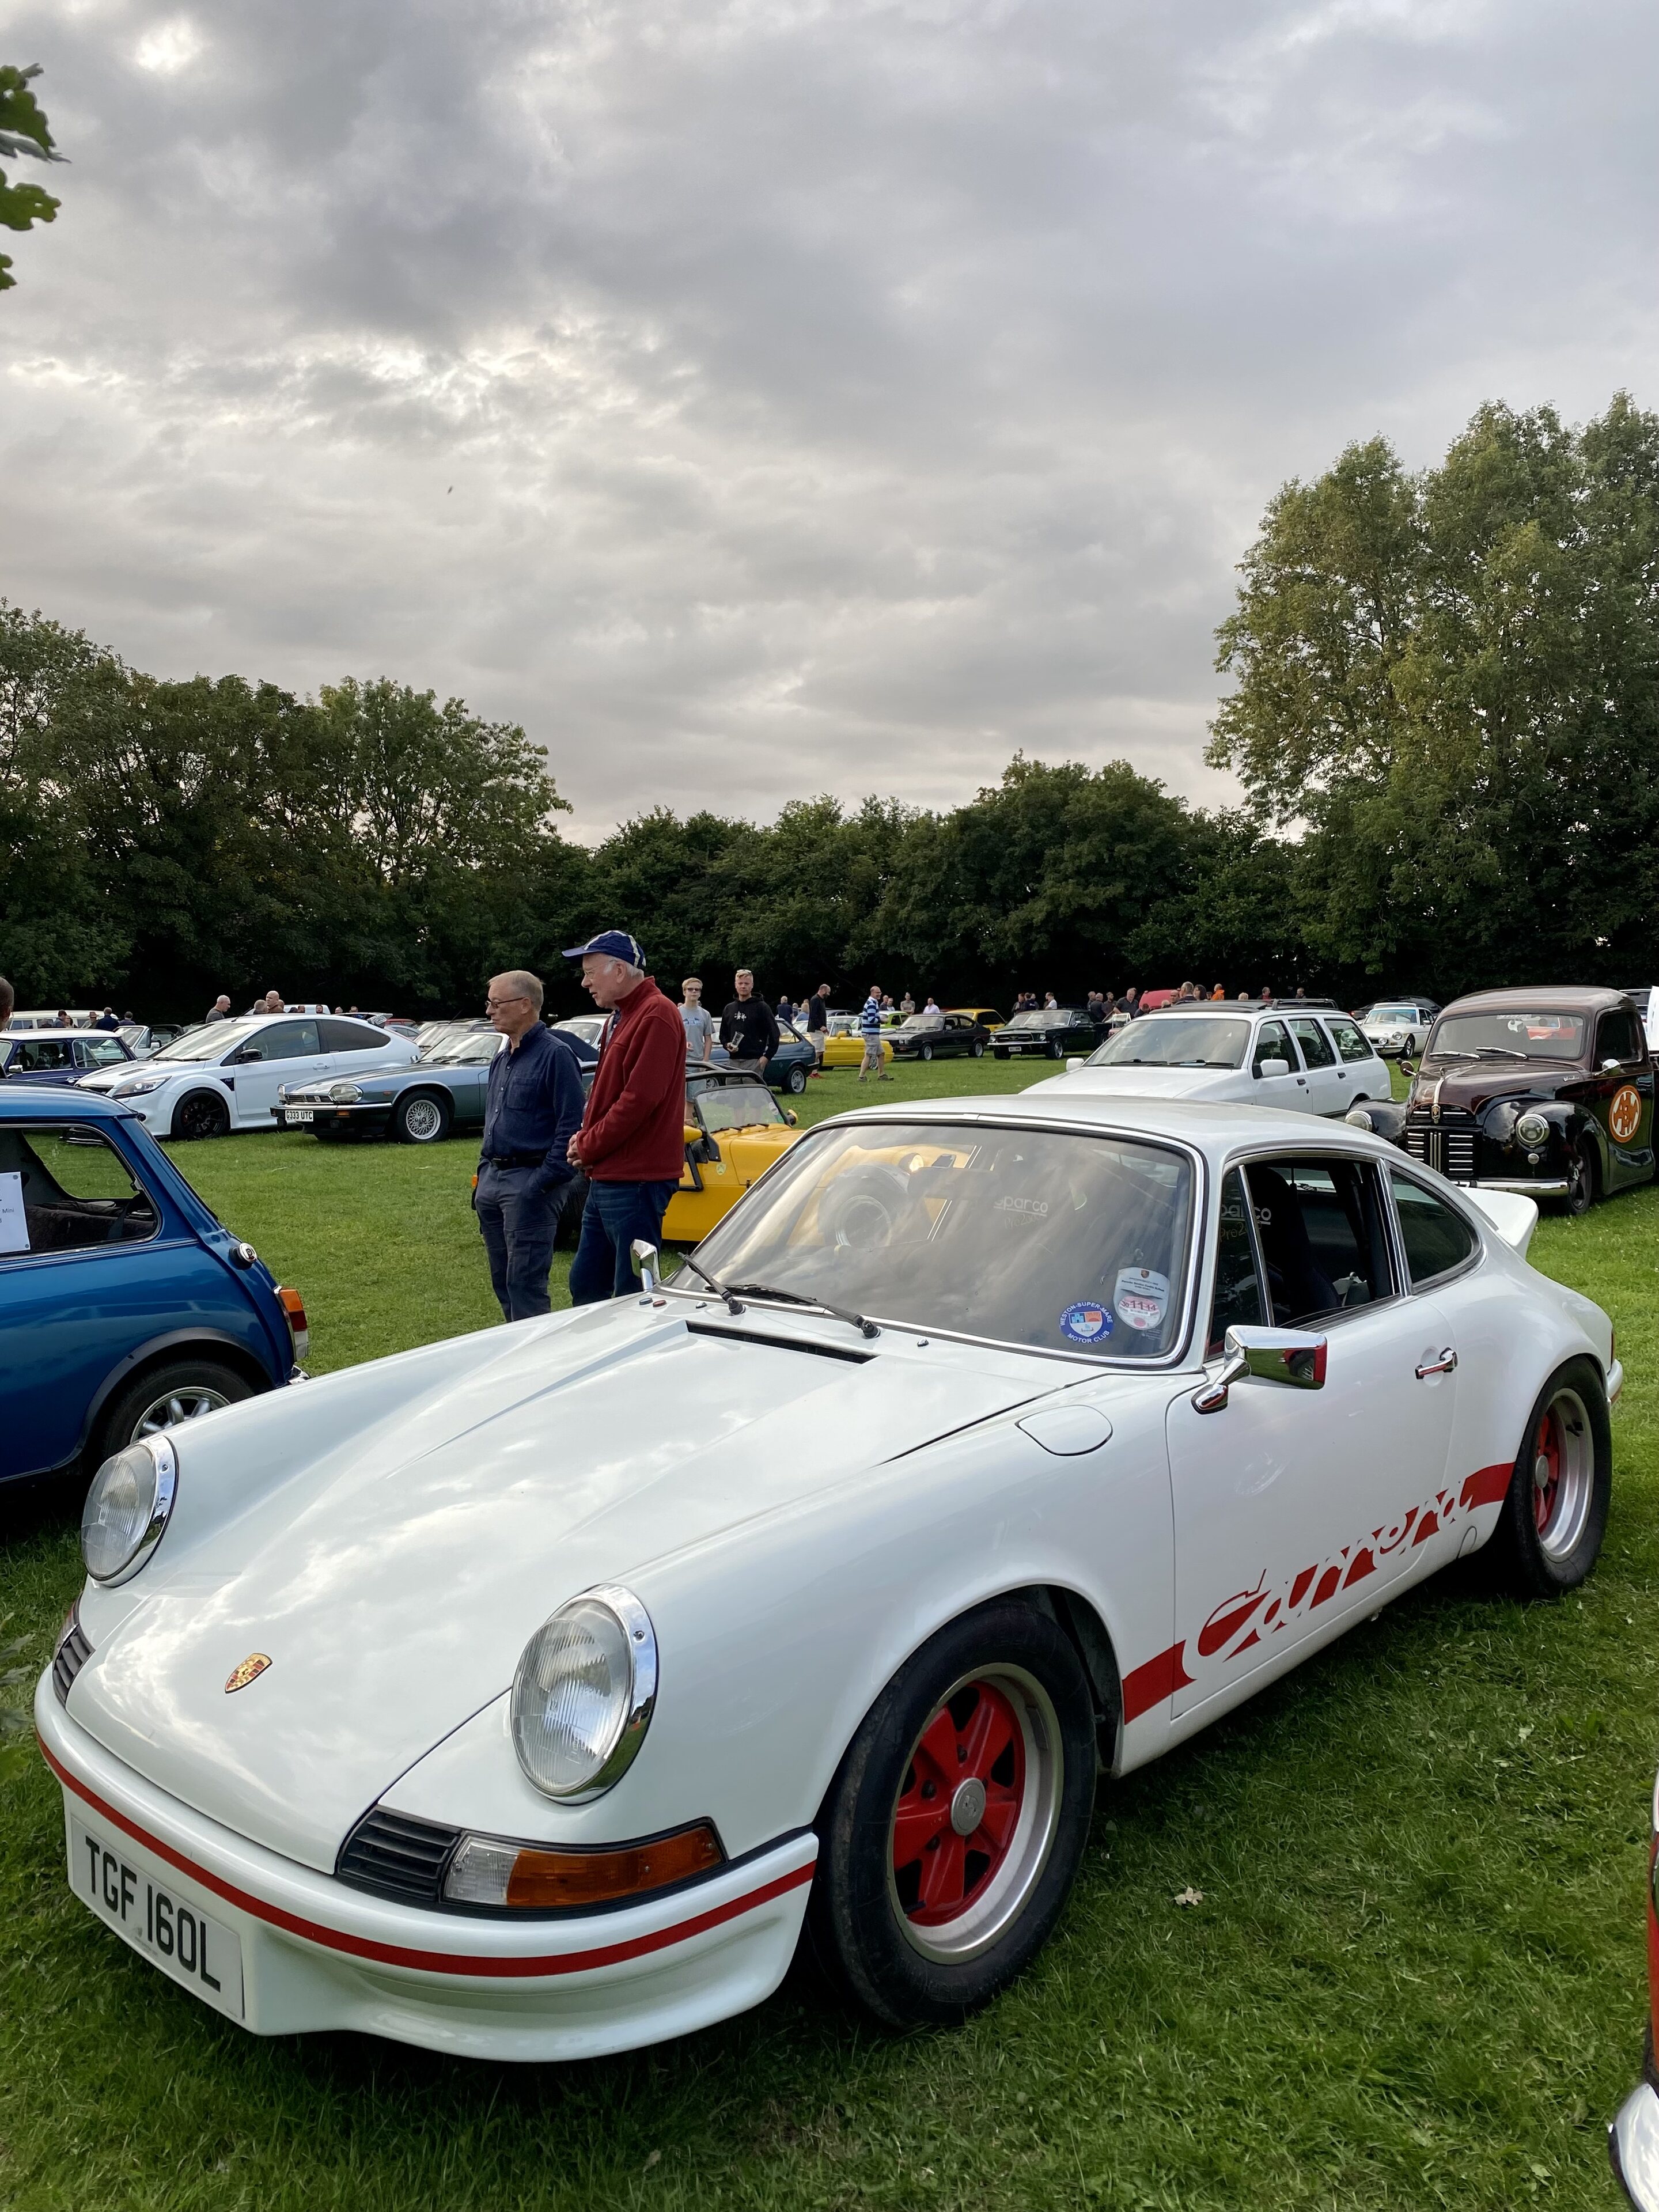 Pistonheads - The image is a photograph of an outdoor scene where vintage cars are parked on grass. There is a white Porsche with red accents and a black roof, positioned to the right of the frame. Adjacent to it, there is another classic vehicle with a yellow paint job and a matching yellow roof. In the background, several other cars can be seen, including one with a blue top and a cream-colored car with a white roof and stripes on its side. There are also people present in the background. The sky overhead appears to be overcast with some patches of sunlight. The setting suggests this could be an auto show or a gathering for classic car enthusiasts.